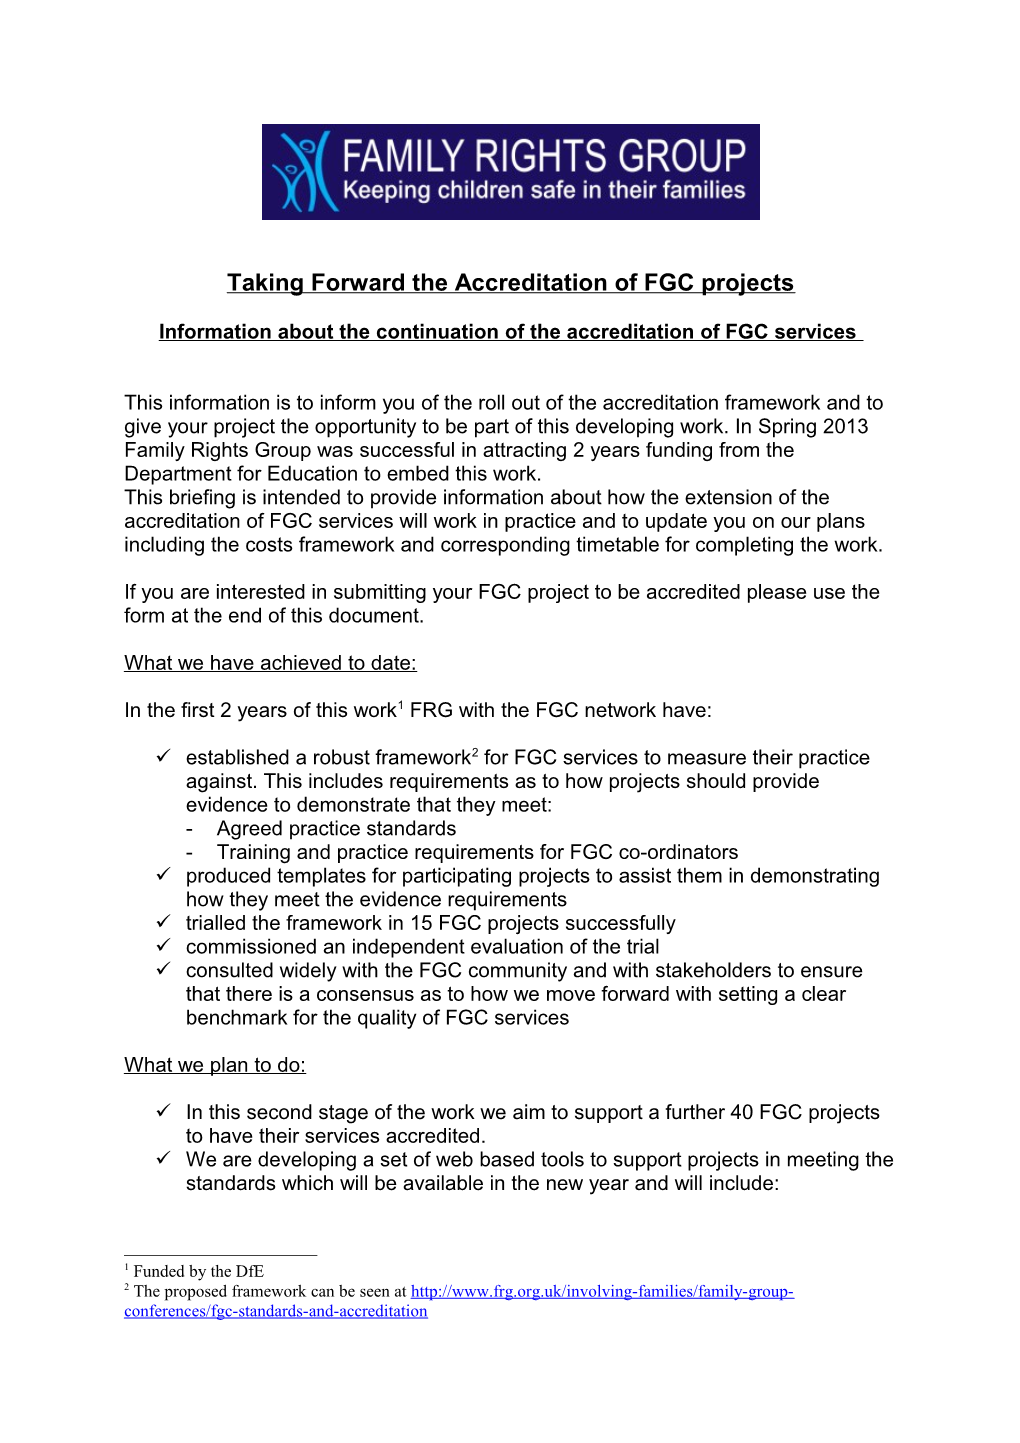 Taking Forward the Accreditation of FGC Projects